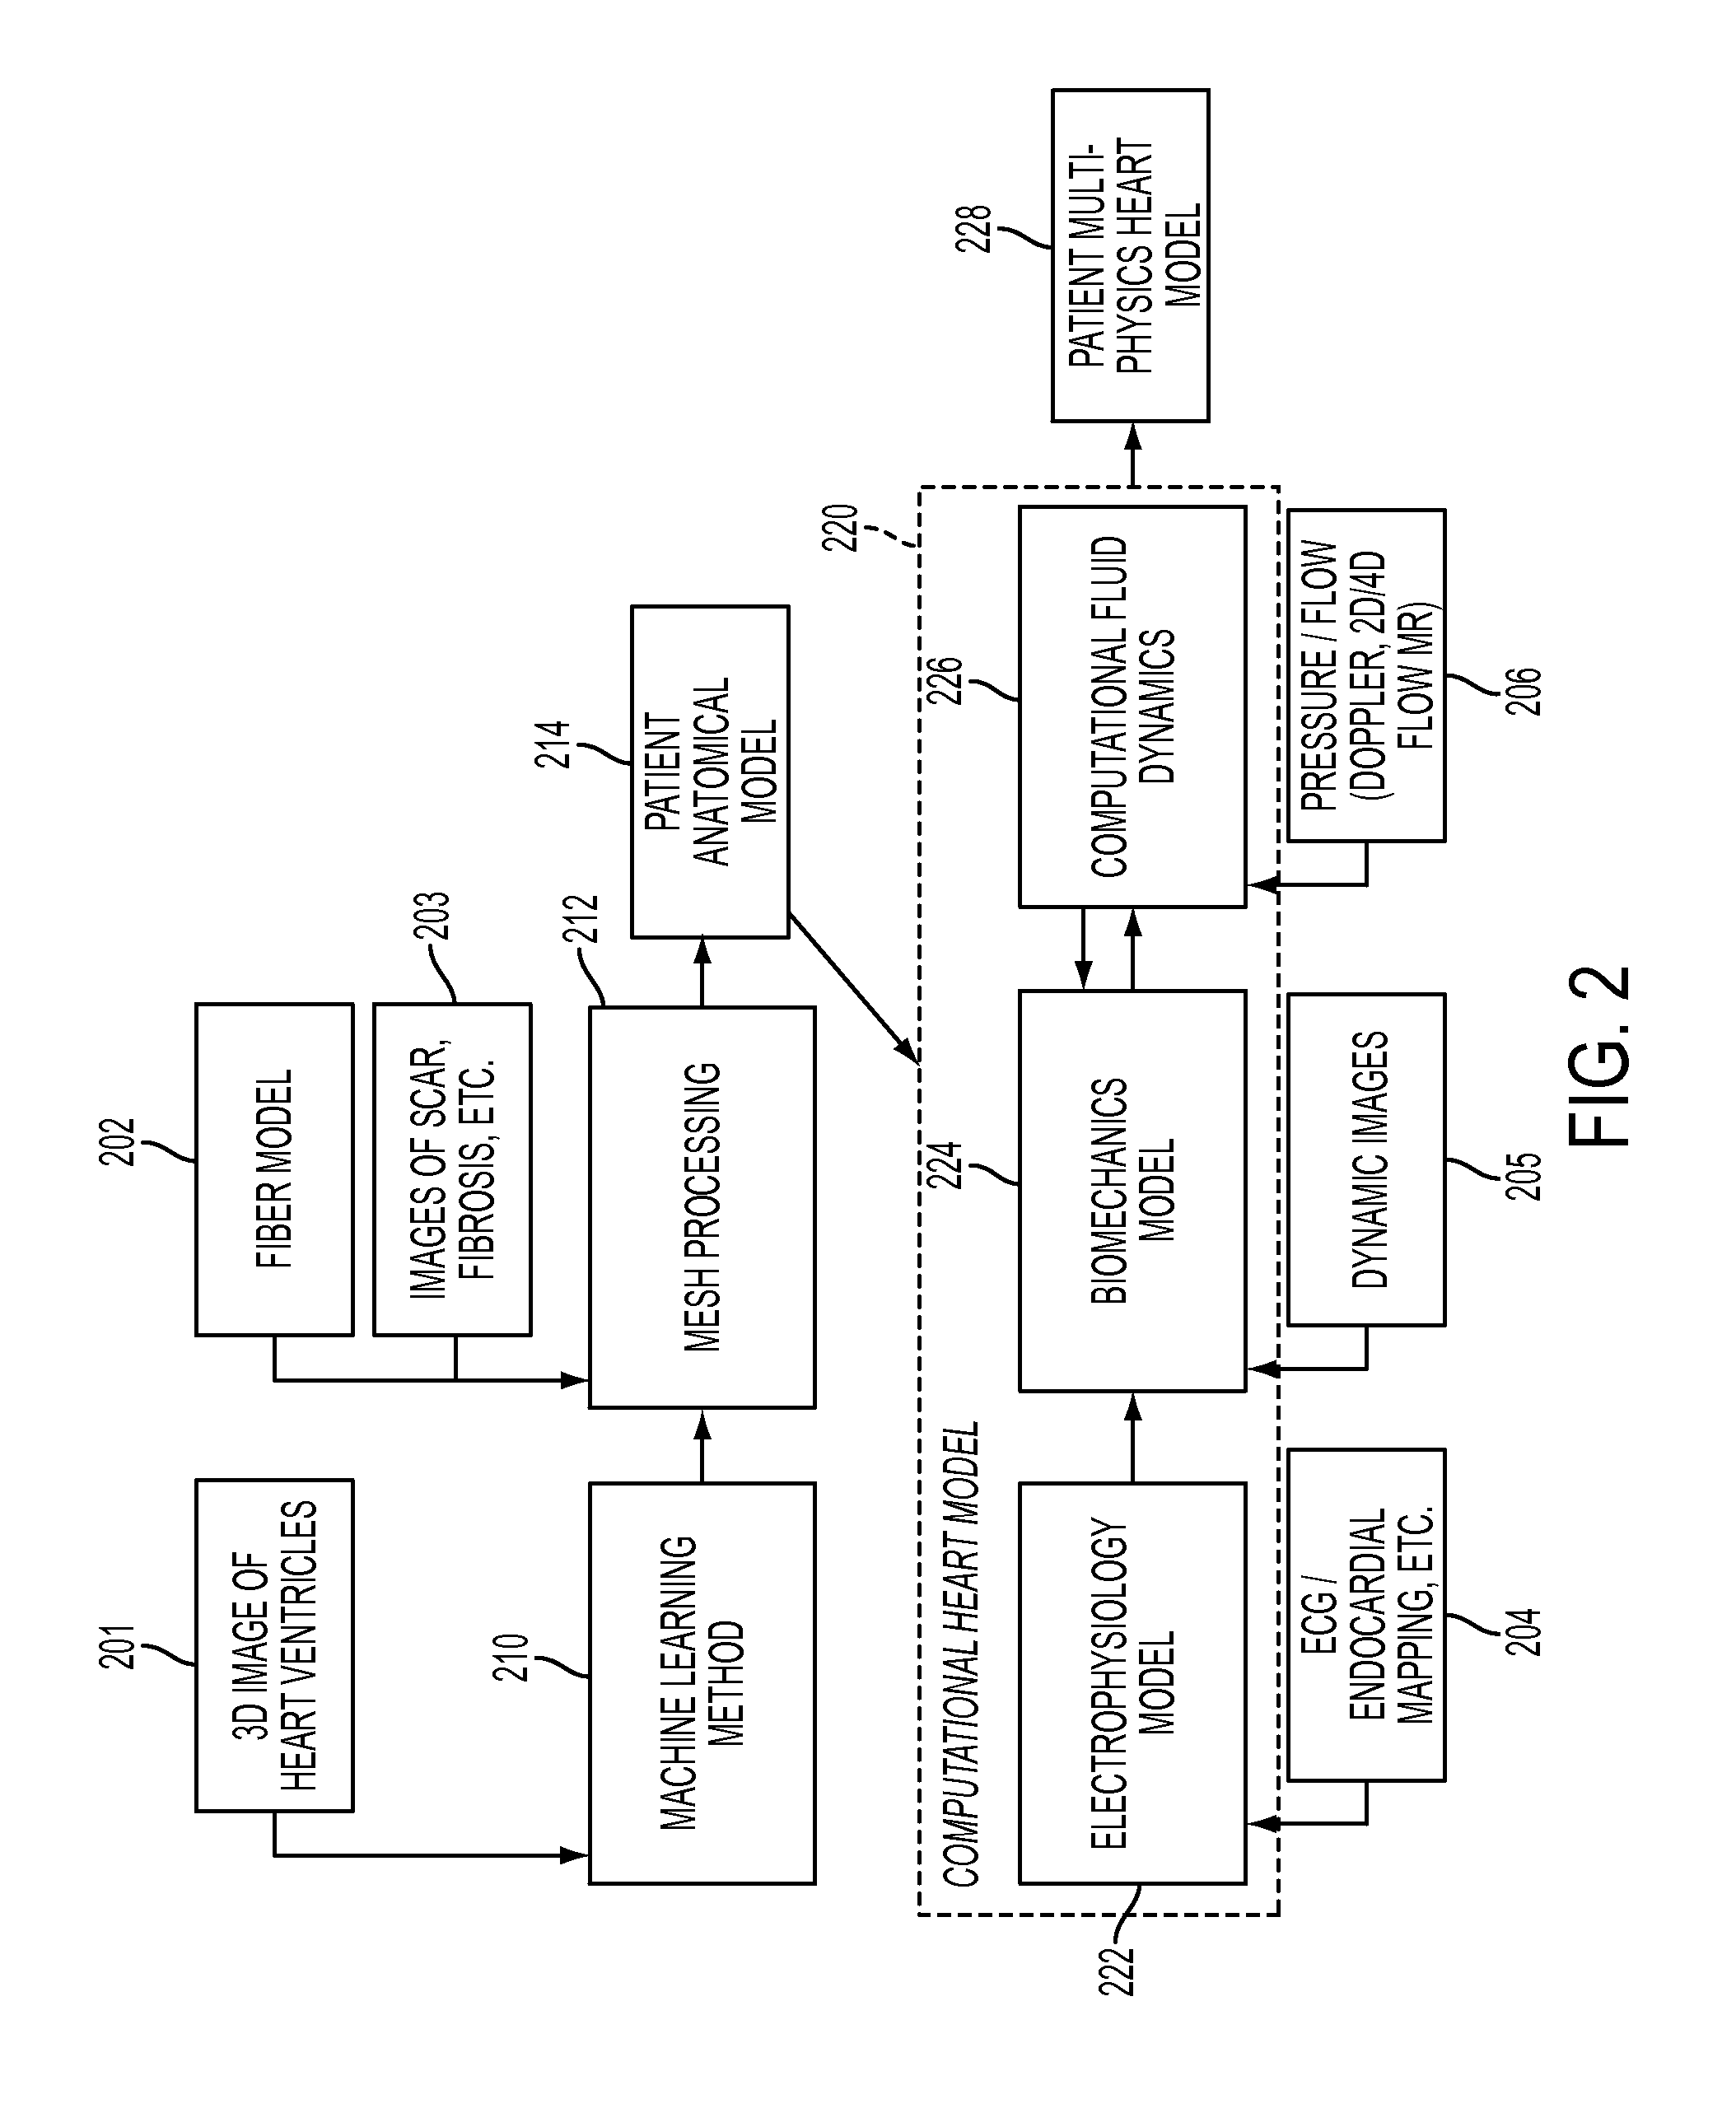 Method and System for Advanced Measurements Computation and Therapy Planning from Medical Data and Images Using a Multi-Physics Fluid-Solid Heart Model